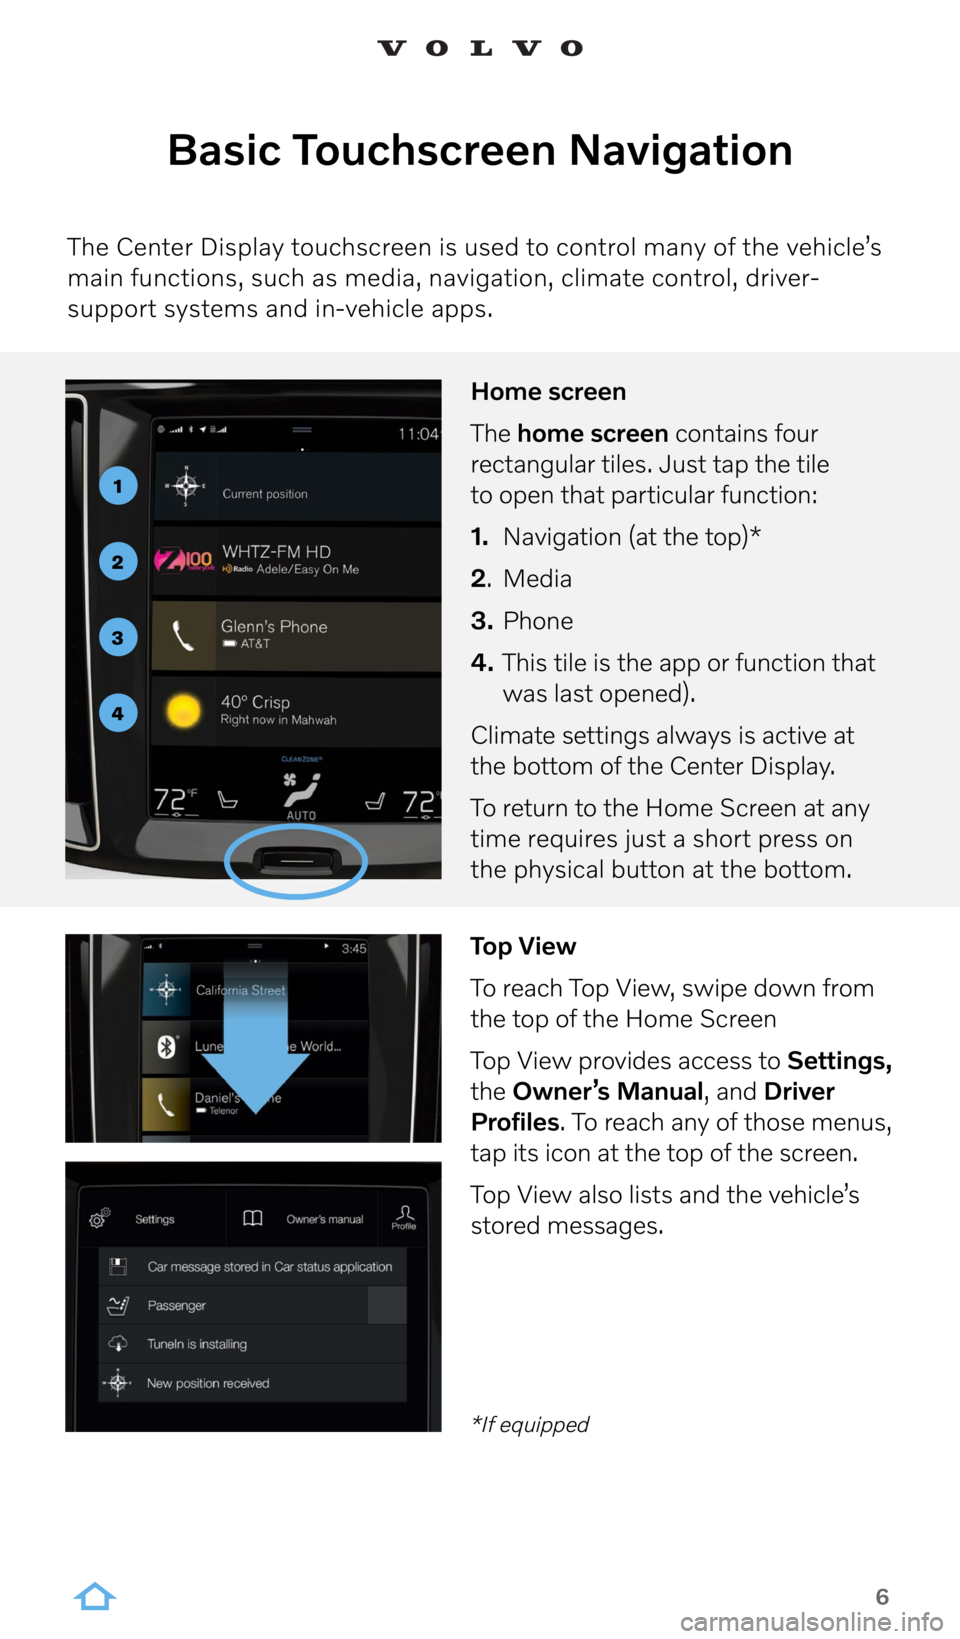 VOLVO S60 RECHARGE 2022  Sensus Digital Guide 6
Basic Touchscreen Navigation
The Center Display touchscreen is used to control many of the vehicle’s 
main functions, such as media, navigation, climate control, driver-
support systems and in-veh